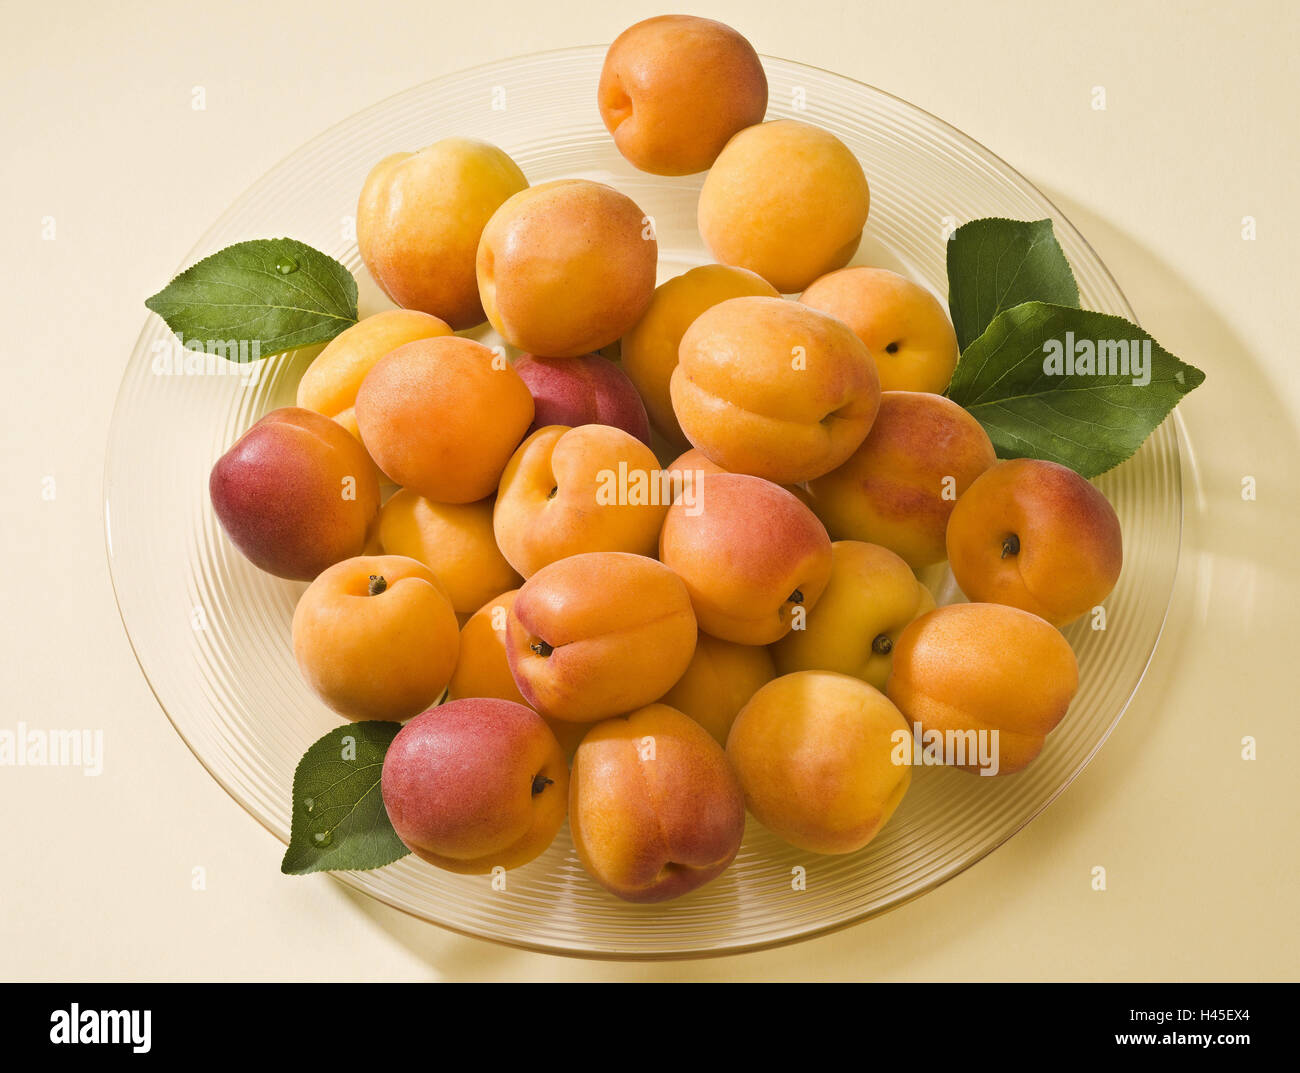 Apricots, Prunus armeniaca, glass plate, leaves, studio, apricots, rich in vitamins, rich in aroma, fruit plate, low-calorie, healthy, green, yellow, fruit, fruits, plant, Stock Photo